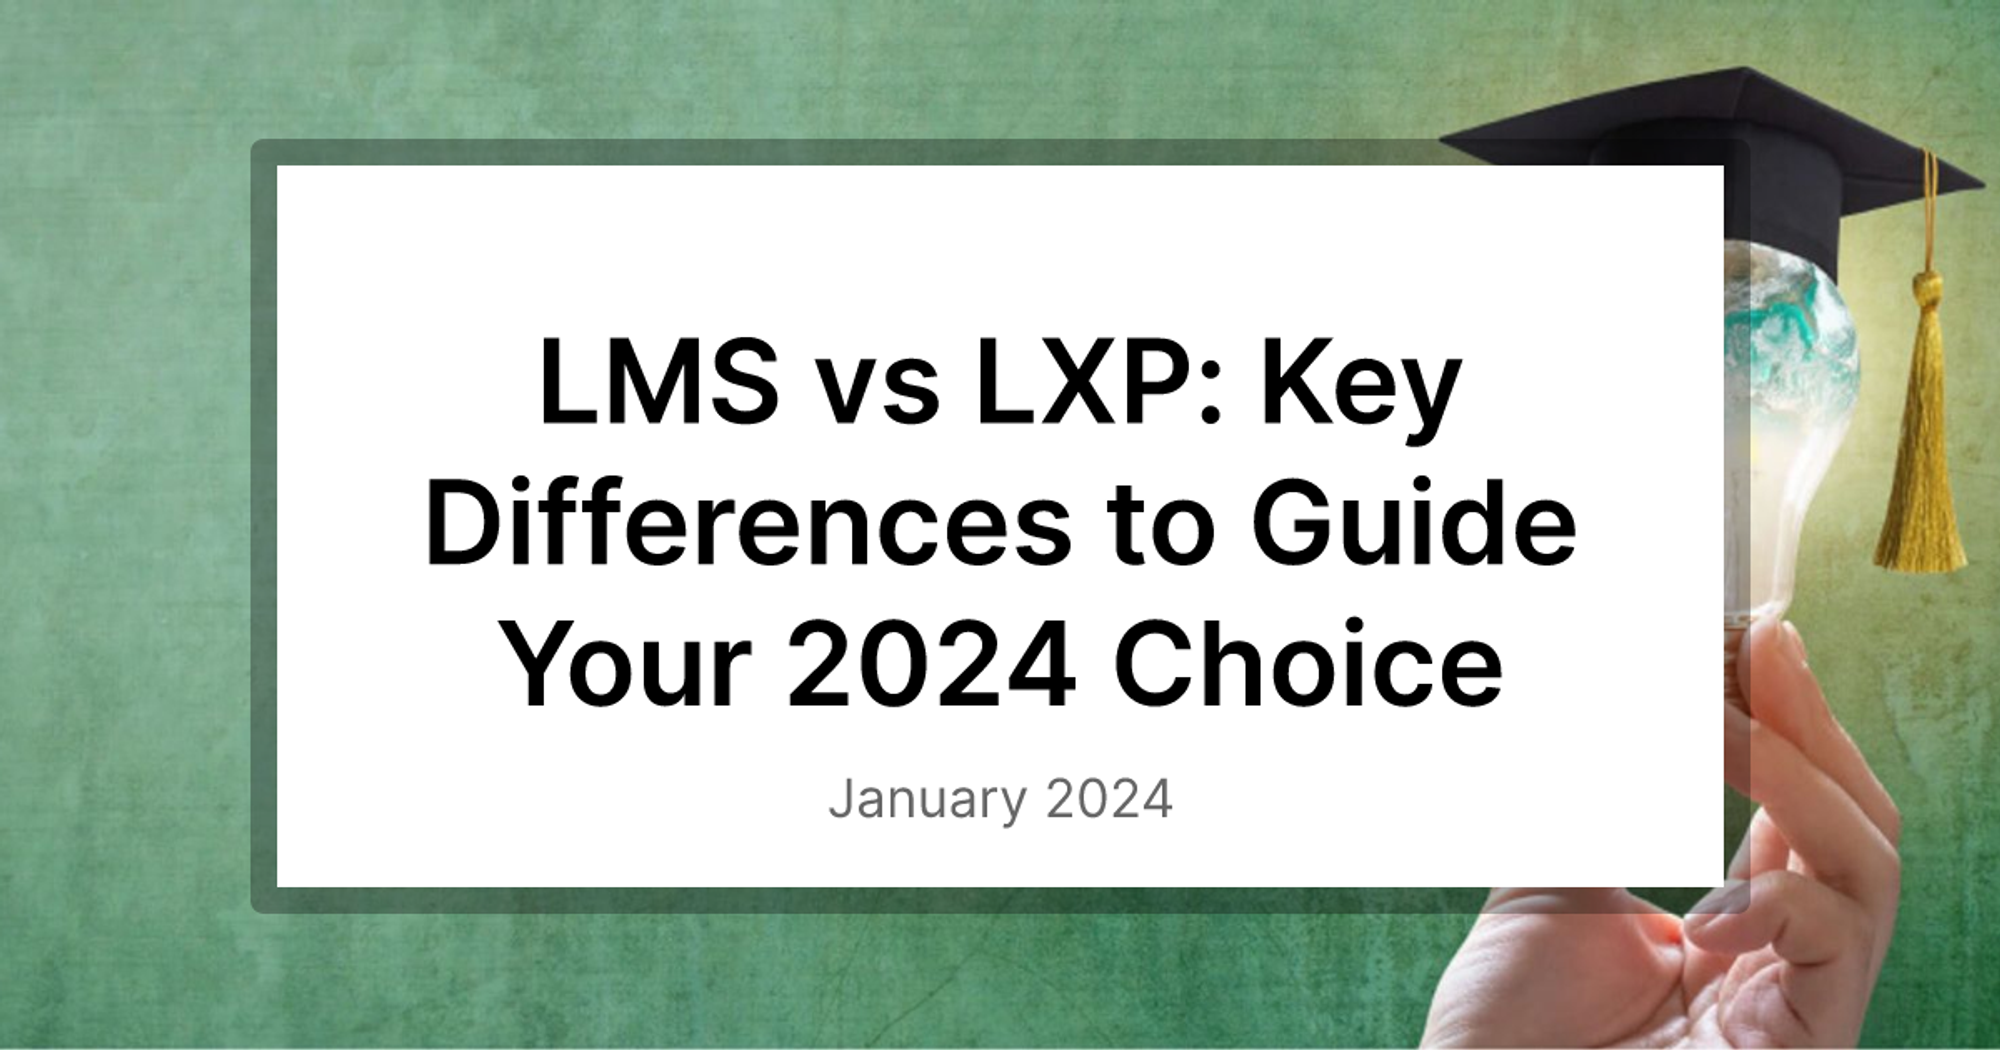 LMS vs LXP: Key Differences to Guide Your 2024 Choice